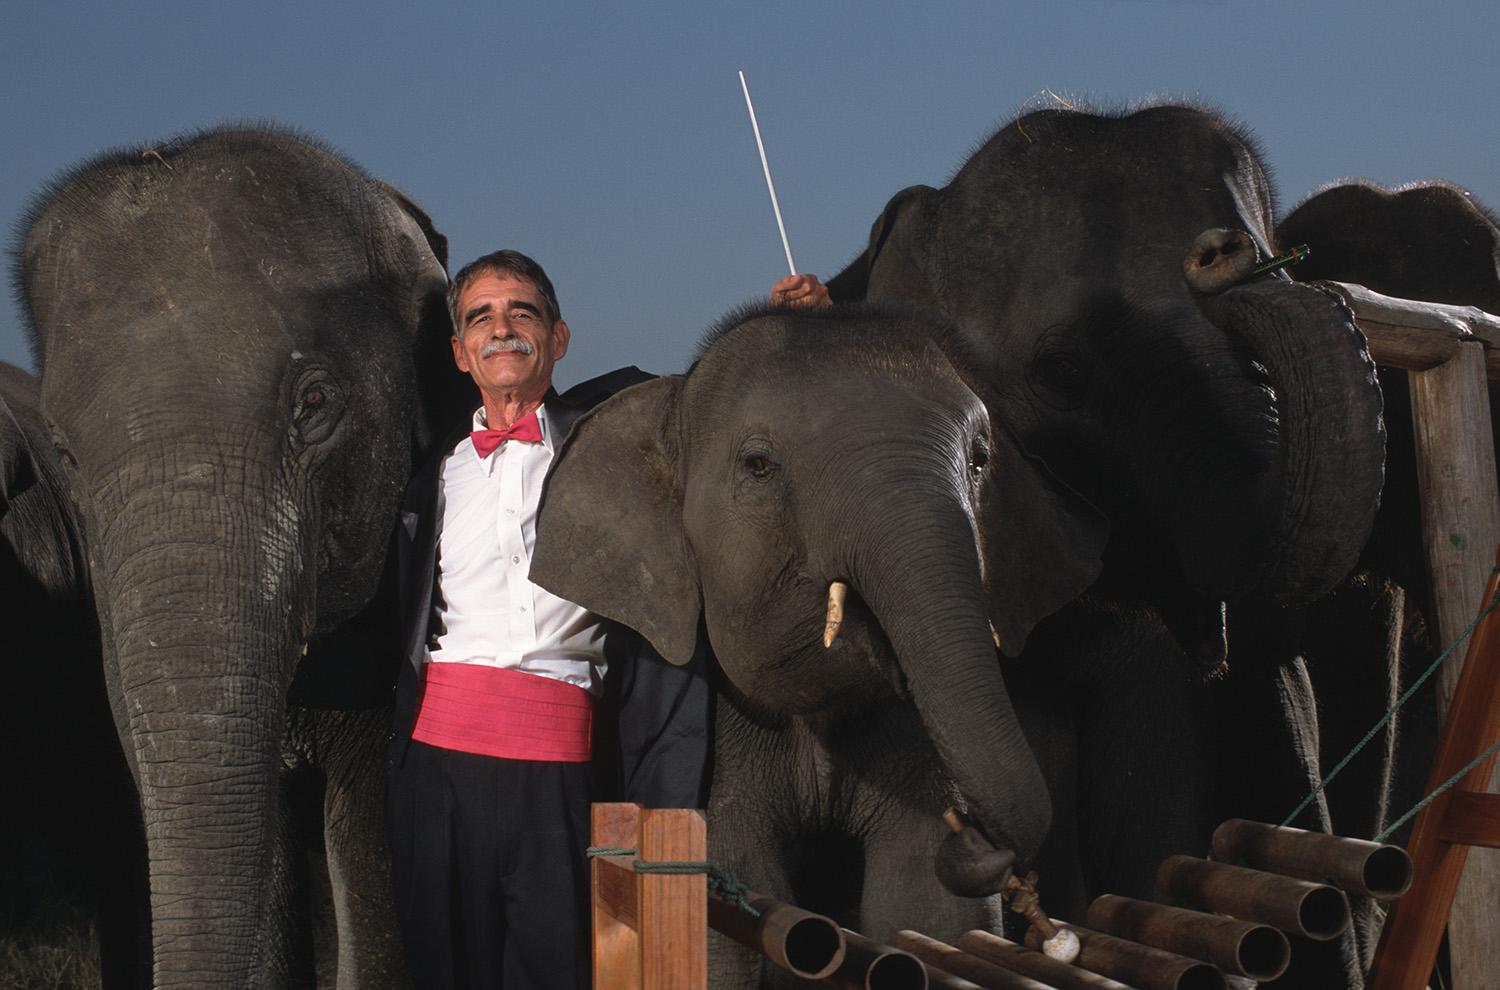 Richard Lair conducts the Thai Elephant Orchestra. Since the ban on logging in Thailand took effect more than a decade ago, most of the domesticated elephants are now unemployed. The Thai Elephant Conservation Center (TECC) has taken to providing alternative employment. Elephant treks, elephant painting, elephant shows and the Elephant Orchestra.